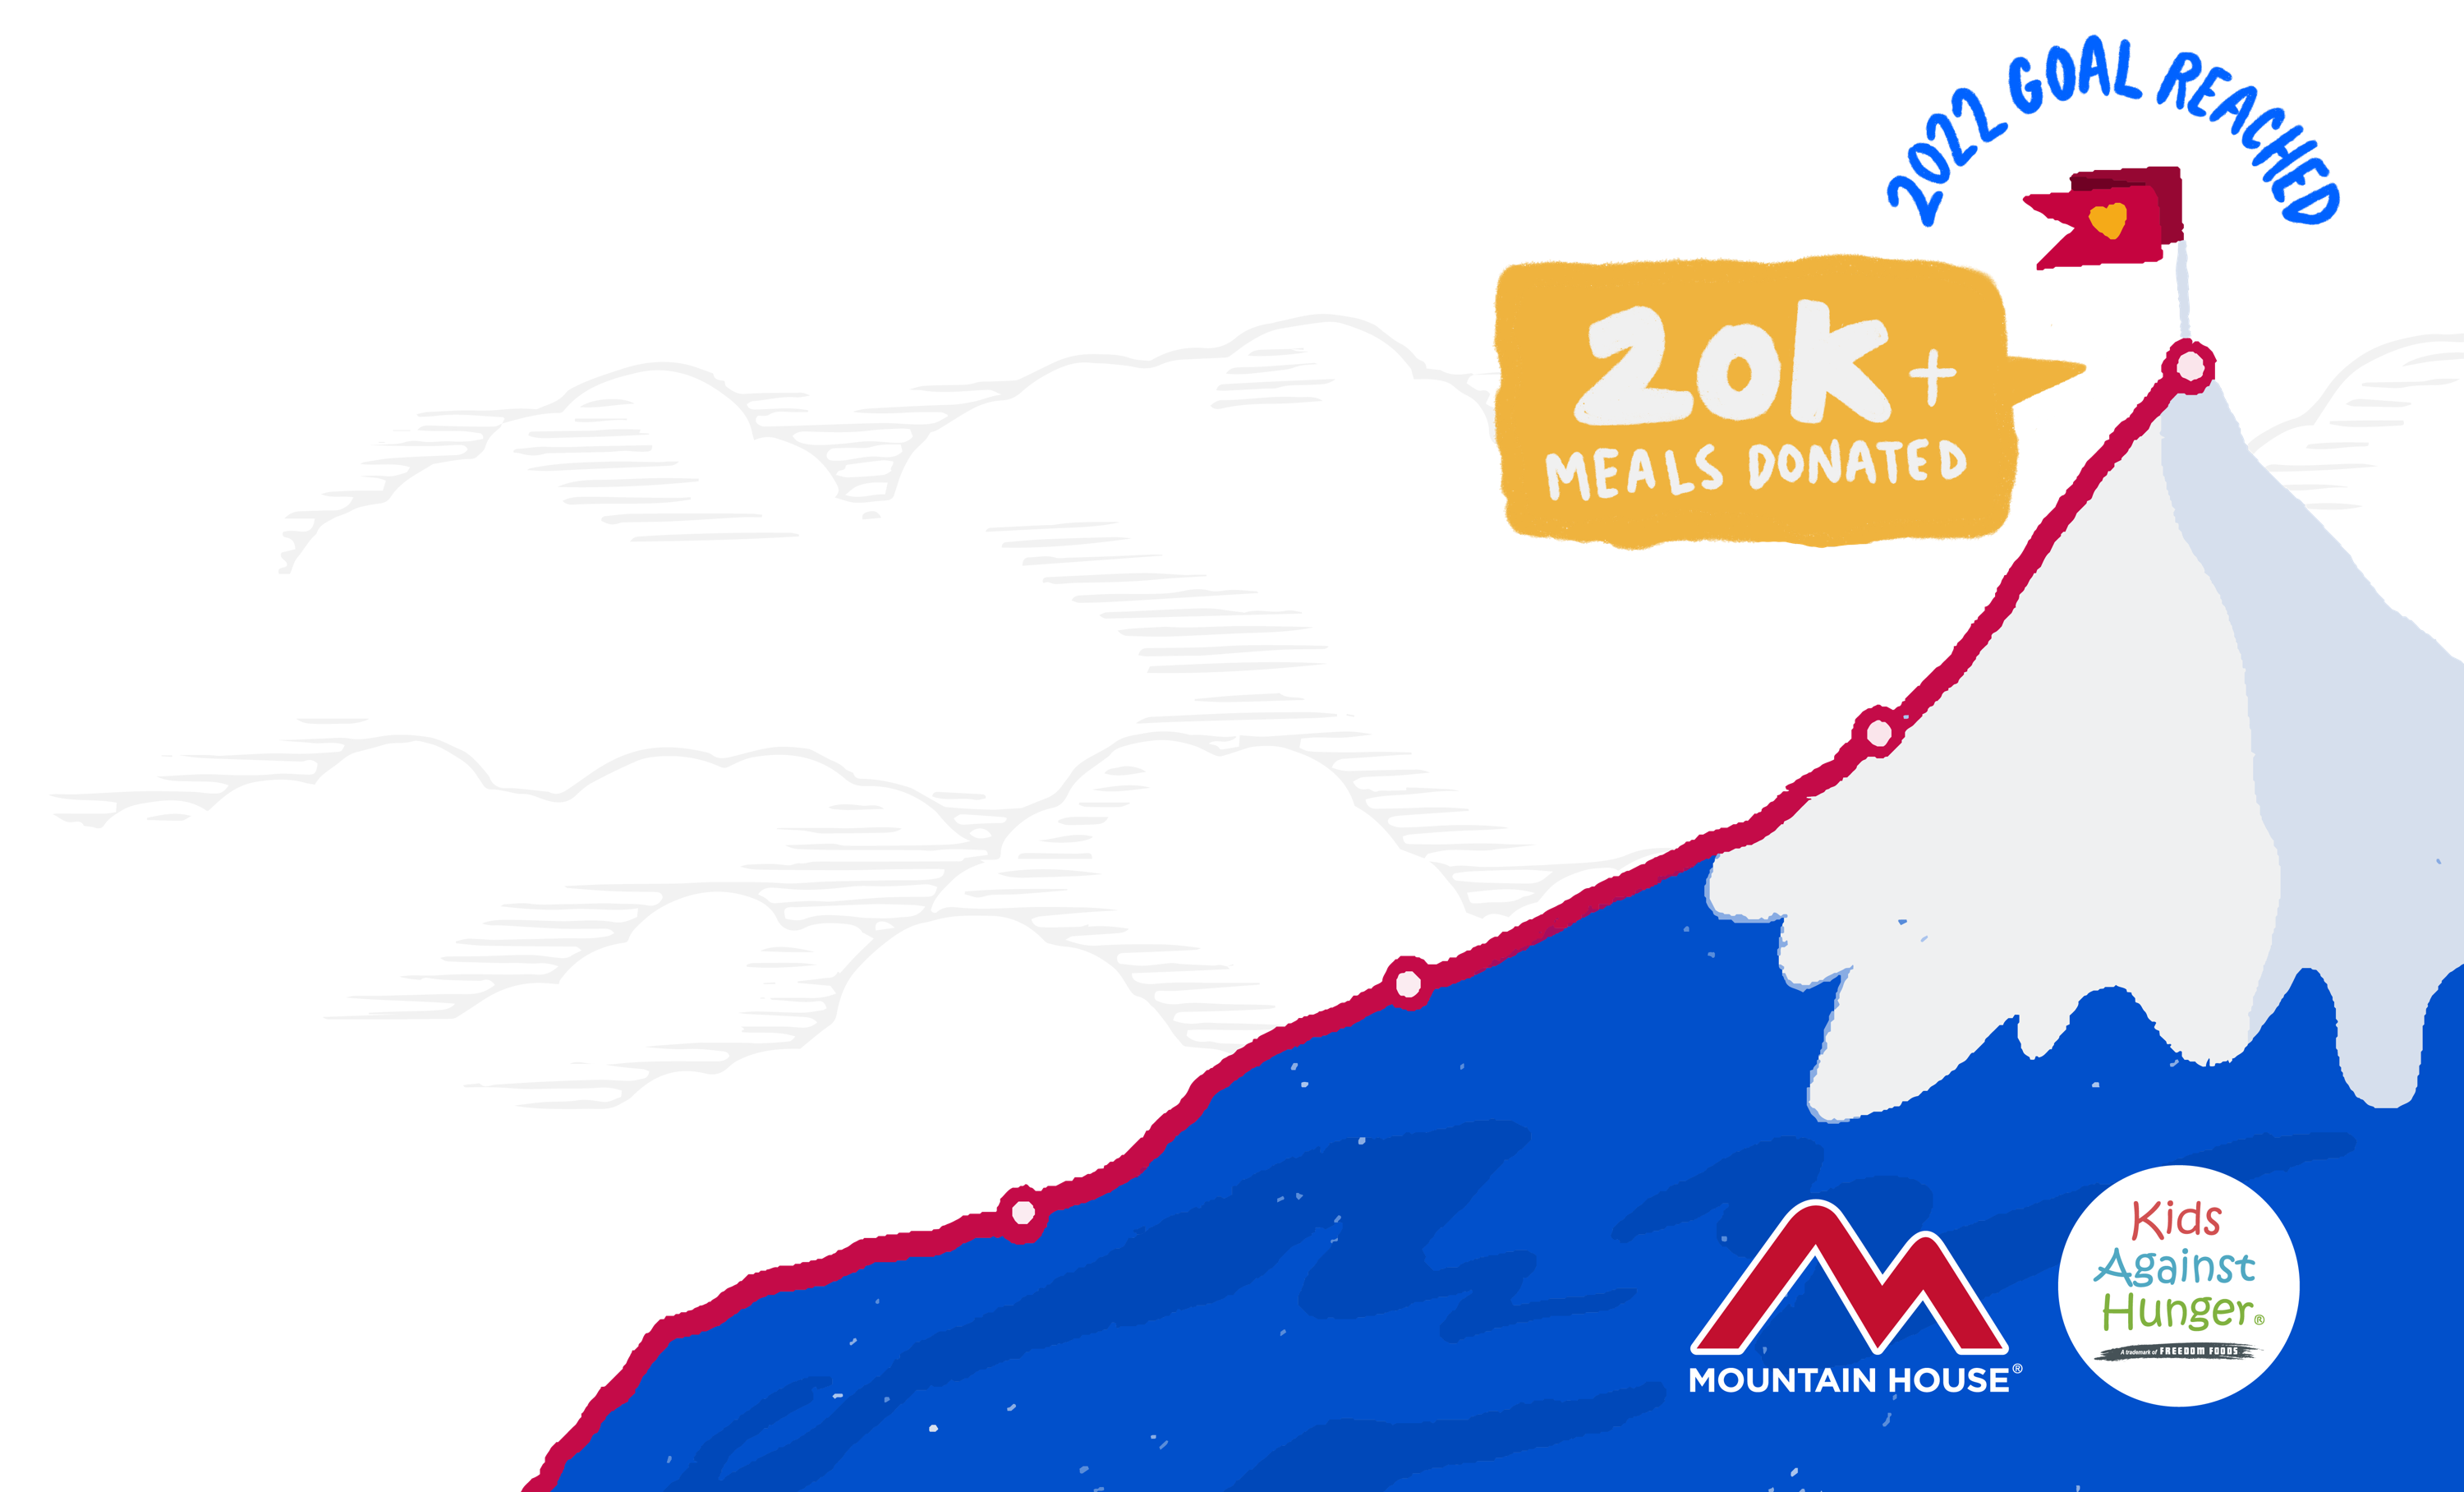 We have met our 2022 goal of over 20,000 meals donated to Kids Against Hunger!